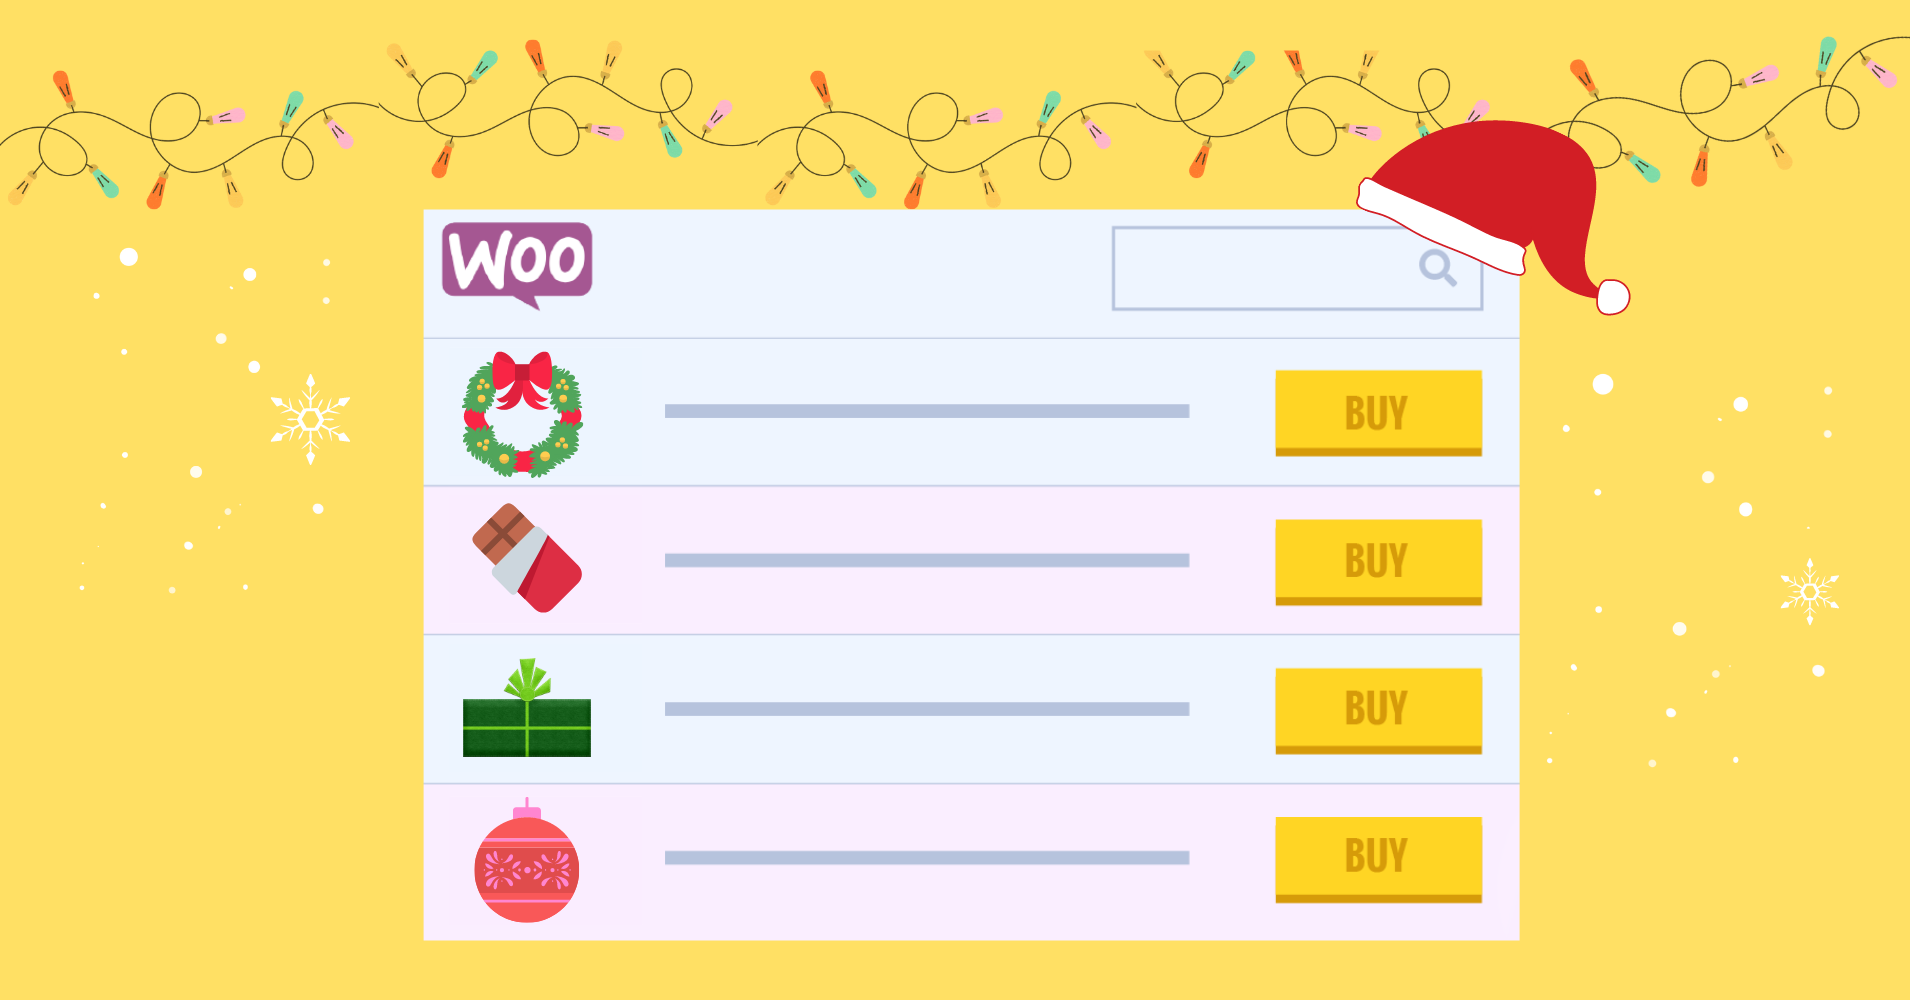 How to optimize your WooCommerce store for Christmas